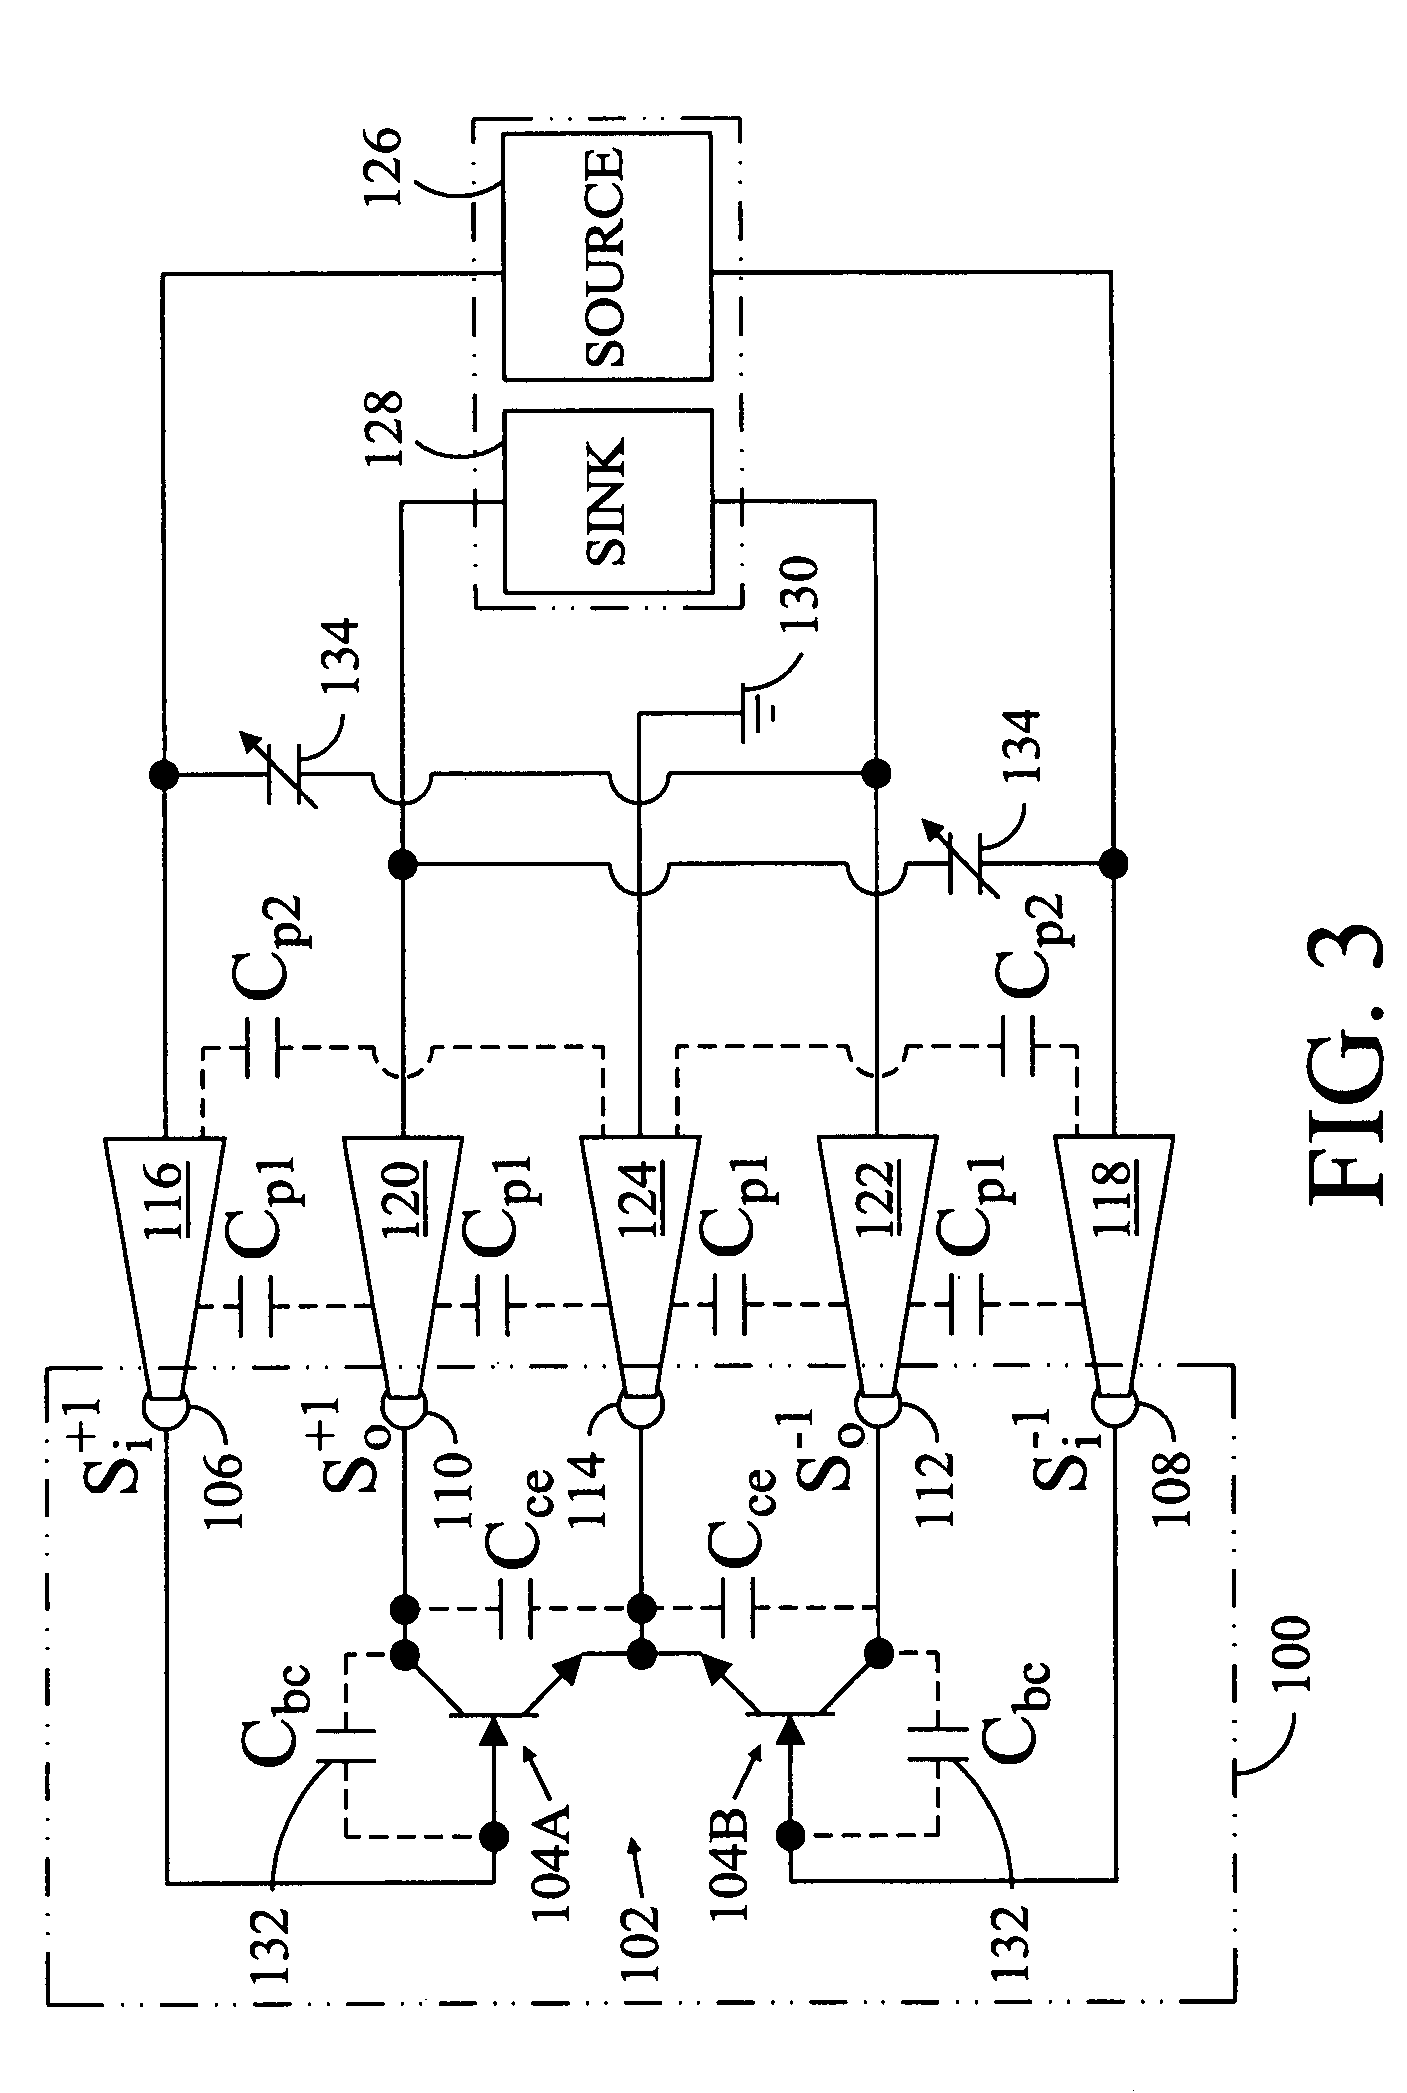 Test structure and probe for differential signals